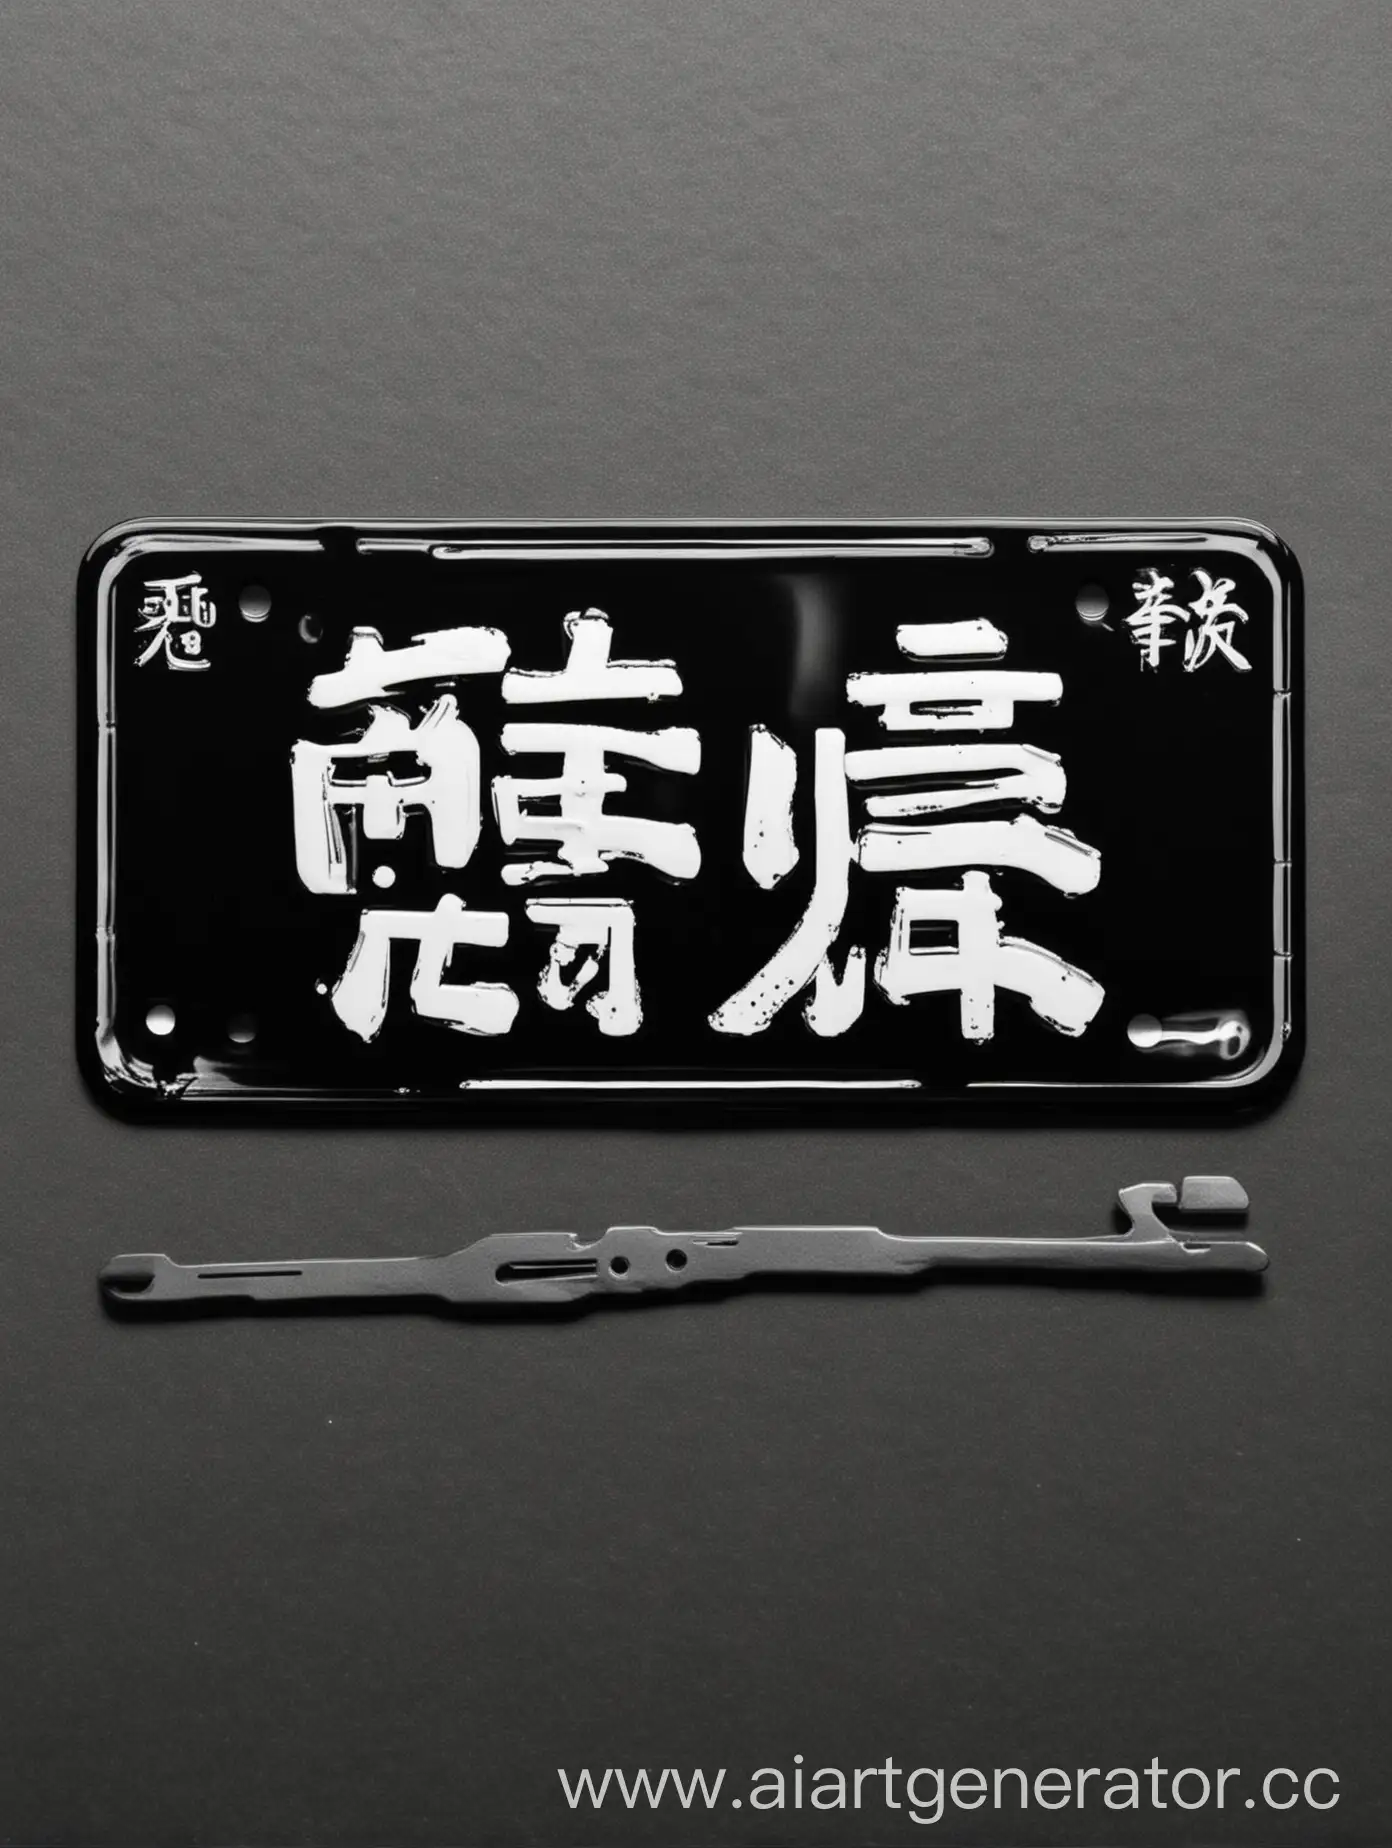 Japanese-Characters-on-Black-Motorcycle-License-Plate